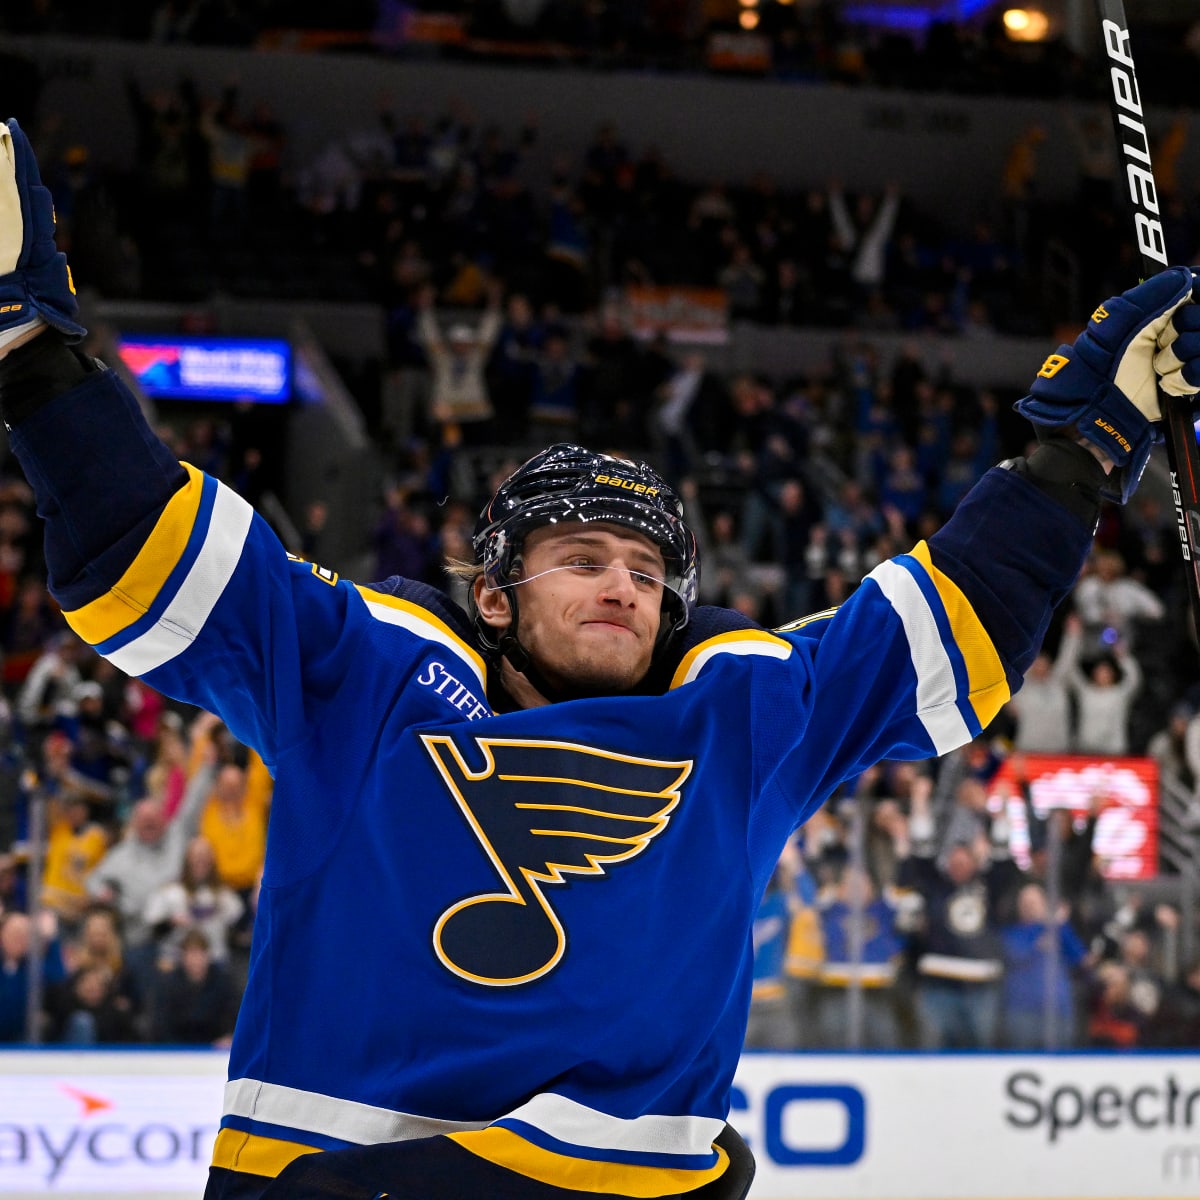 Blues at Blackhawks Free Live Stream NHL Online, Channel, Time - How to Watch and Stream Major League and College Sports